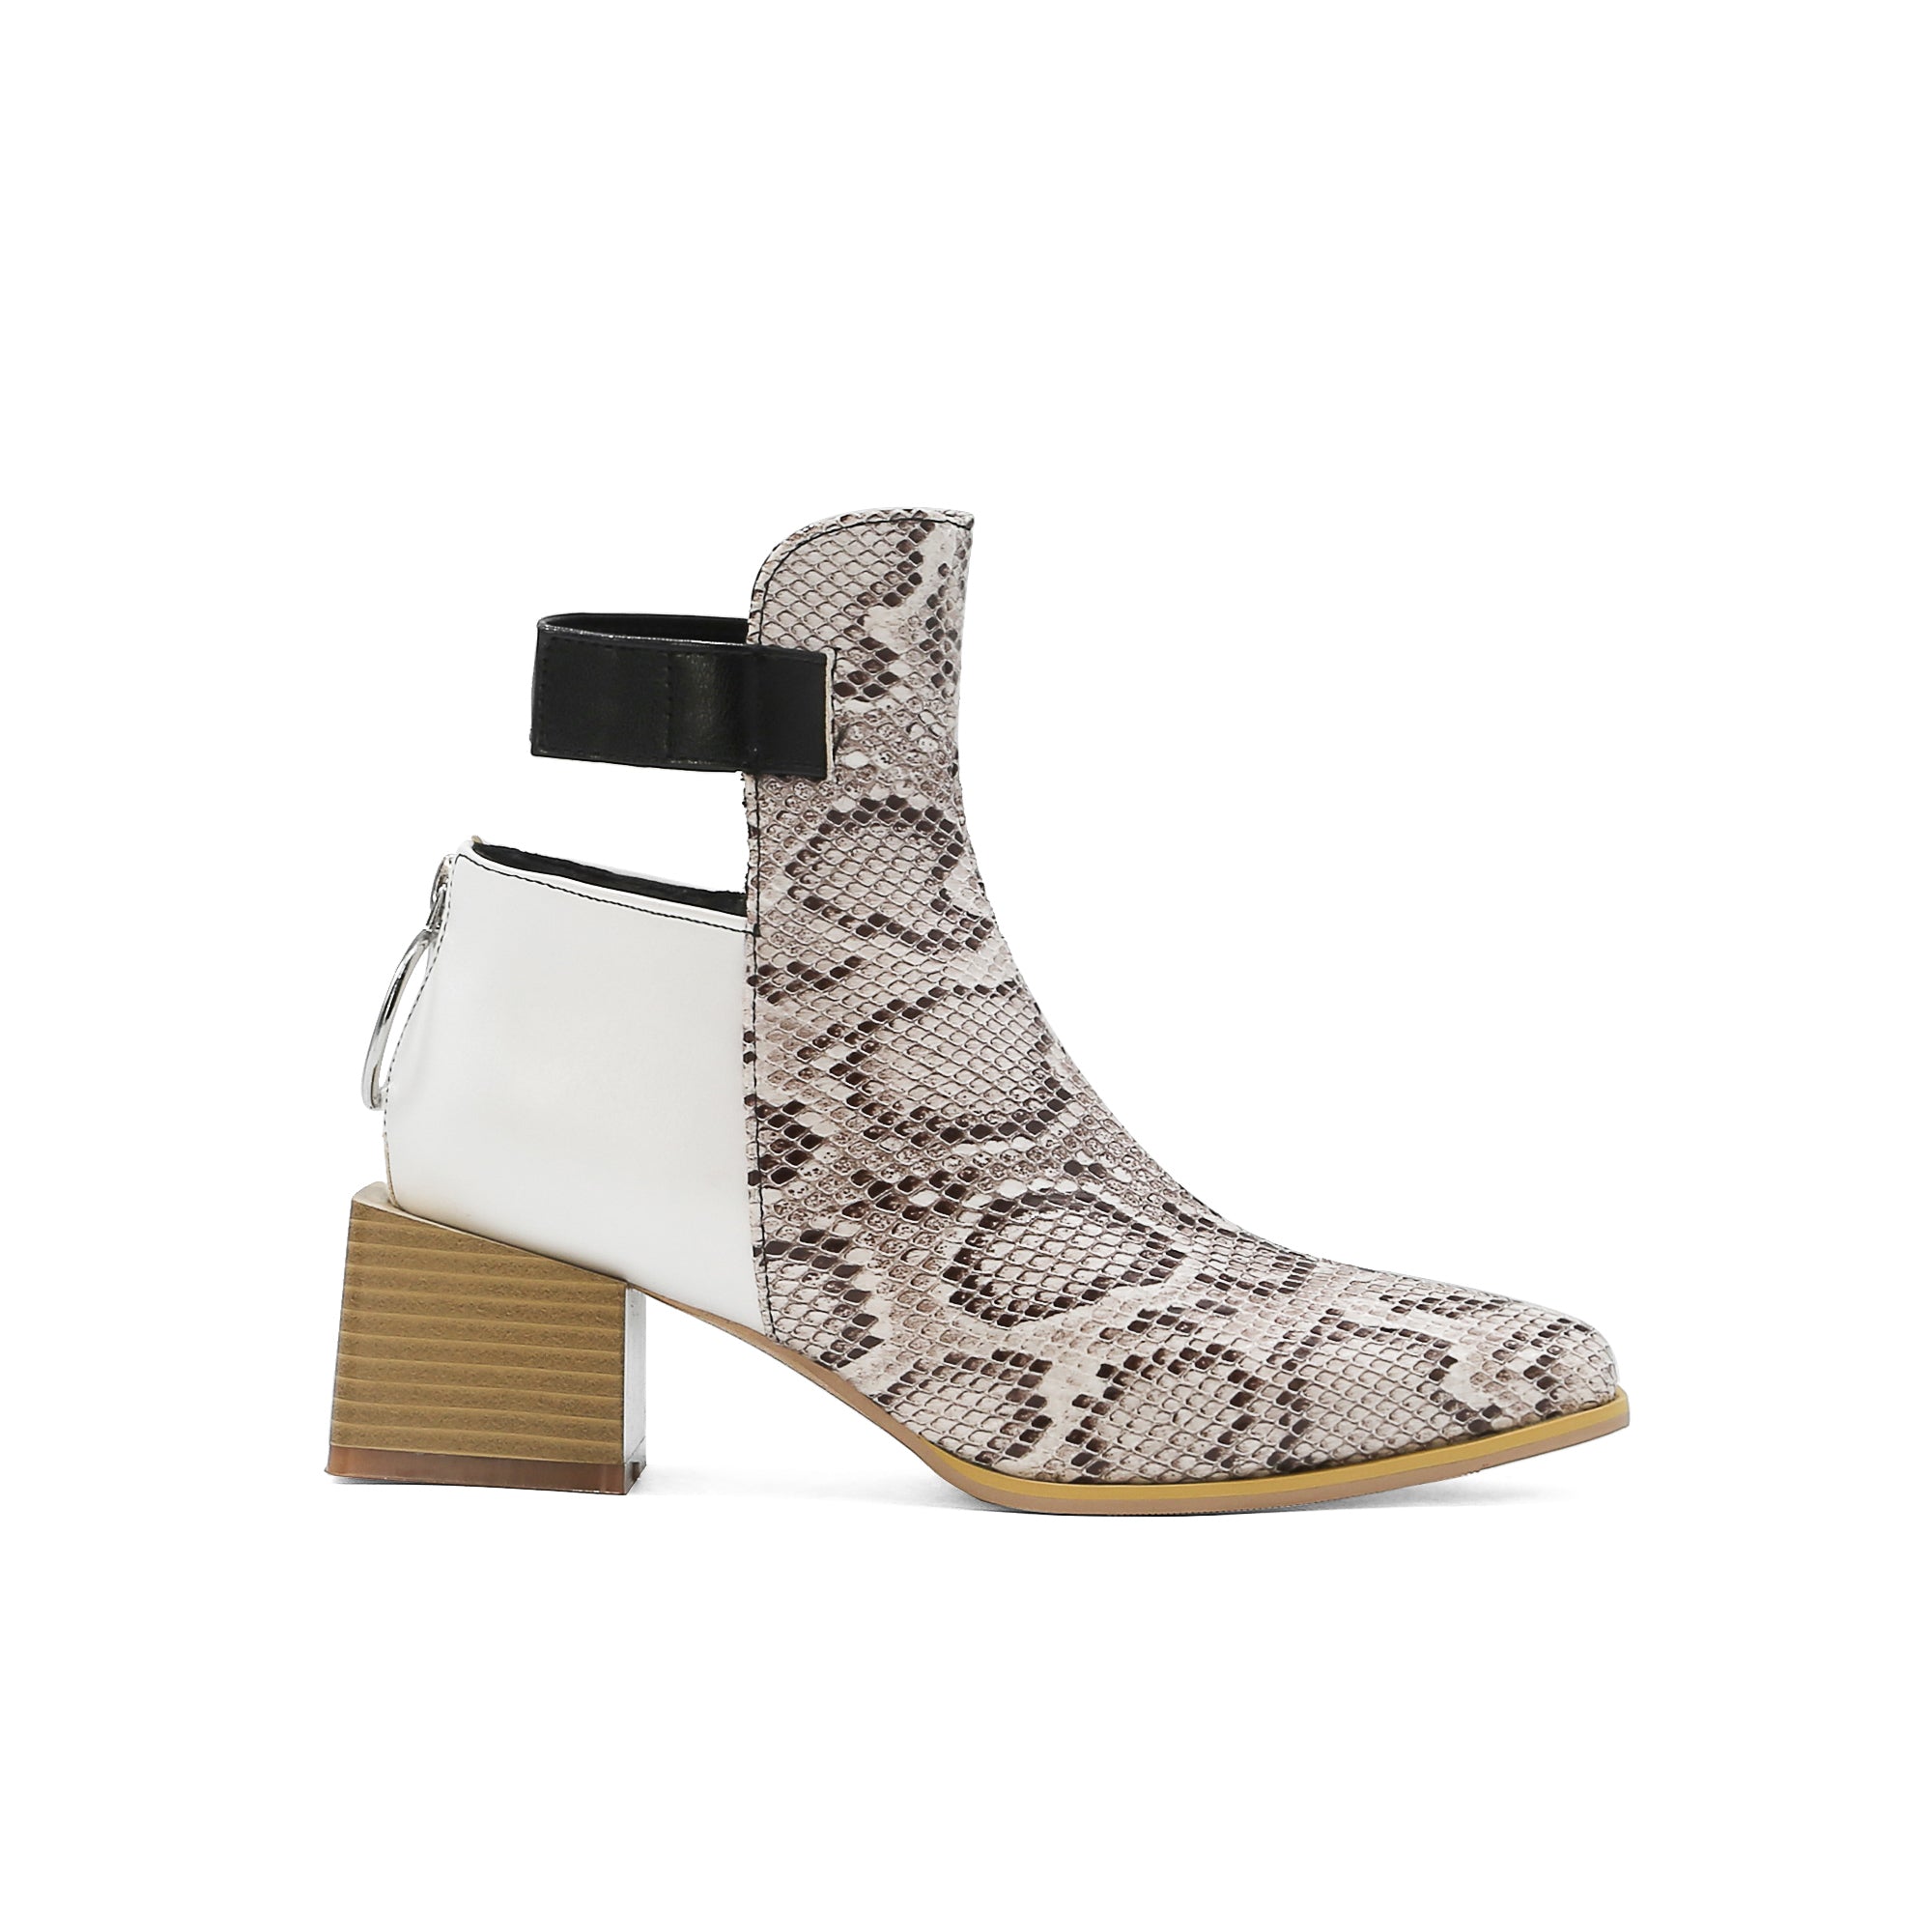 Bigsizeheels American street west ankle boots - White freeshipping - bigsizeheel®-size5-size15 -All Plus Sizes Available!